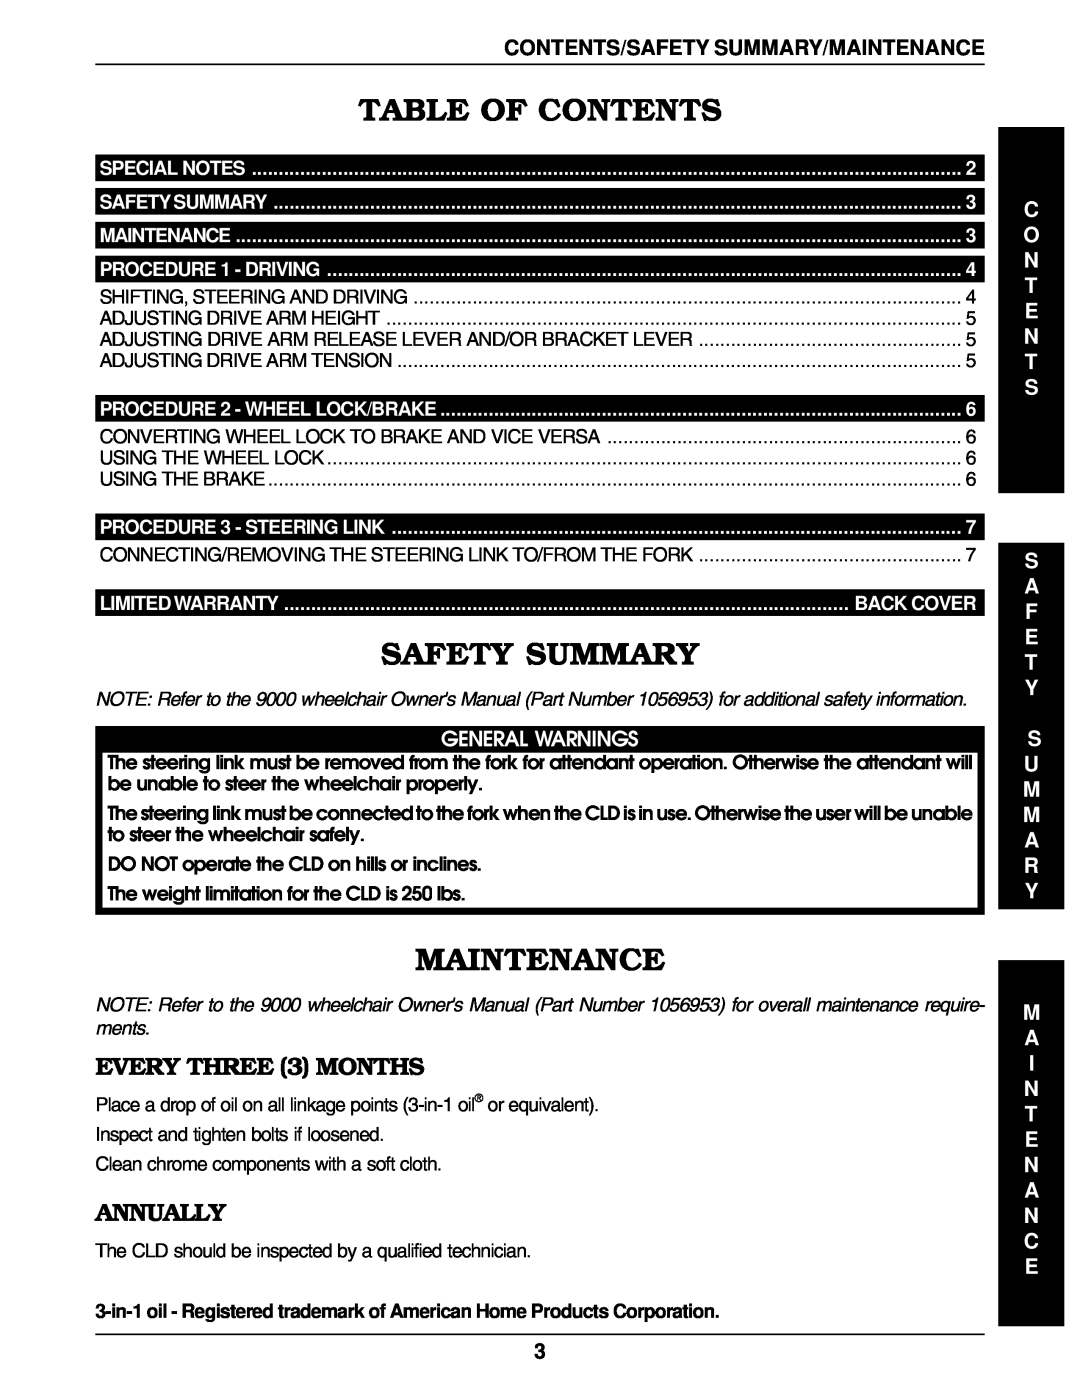 Invacare 9000 Wheelchairs Table Of Contents, Safety Summary, Maintenance, EVERY THREE 3 MONTHS, Annually, General Warnings 